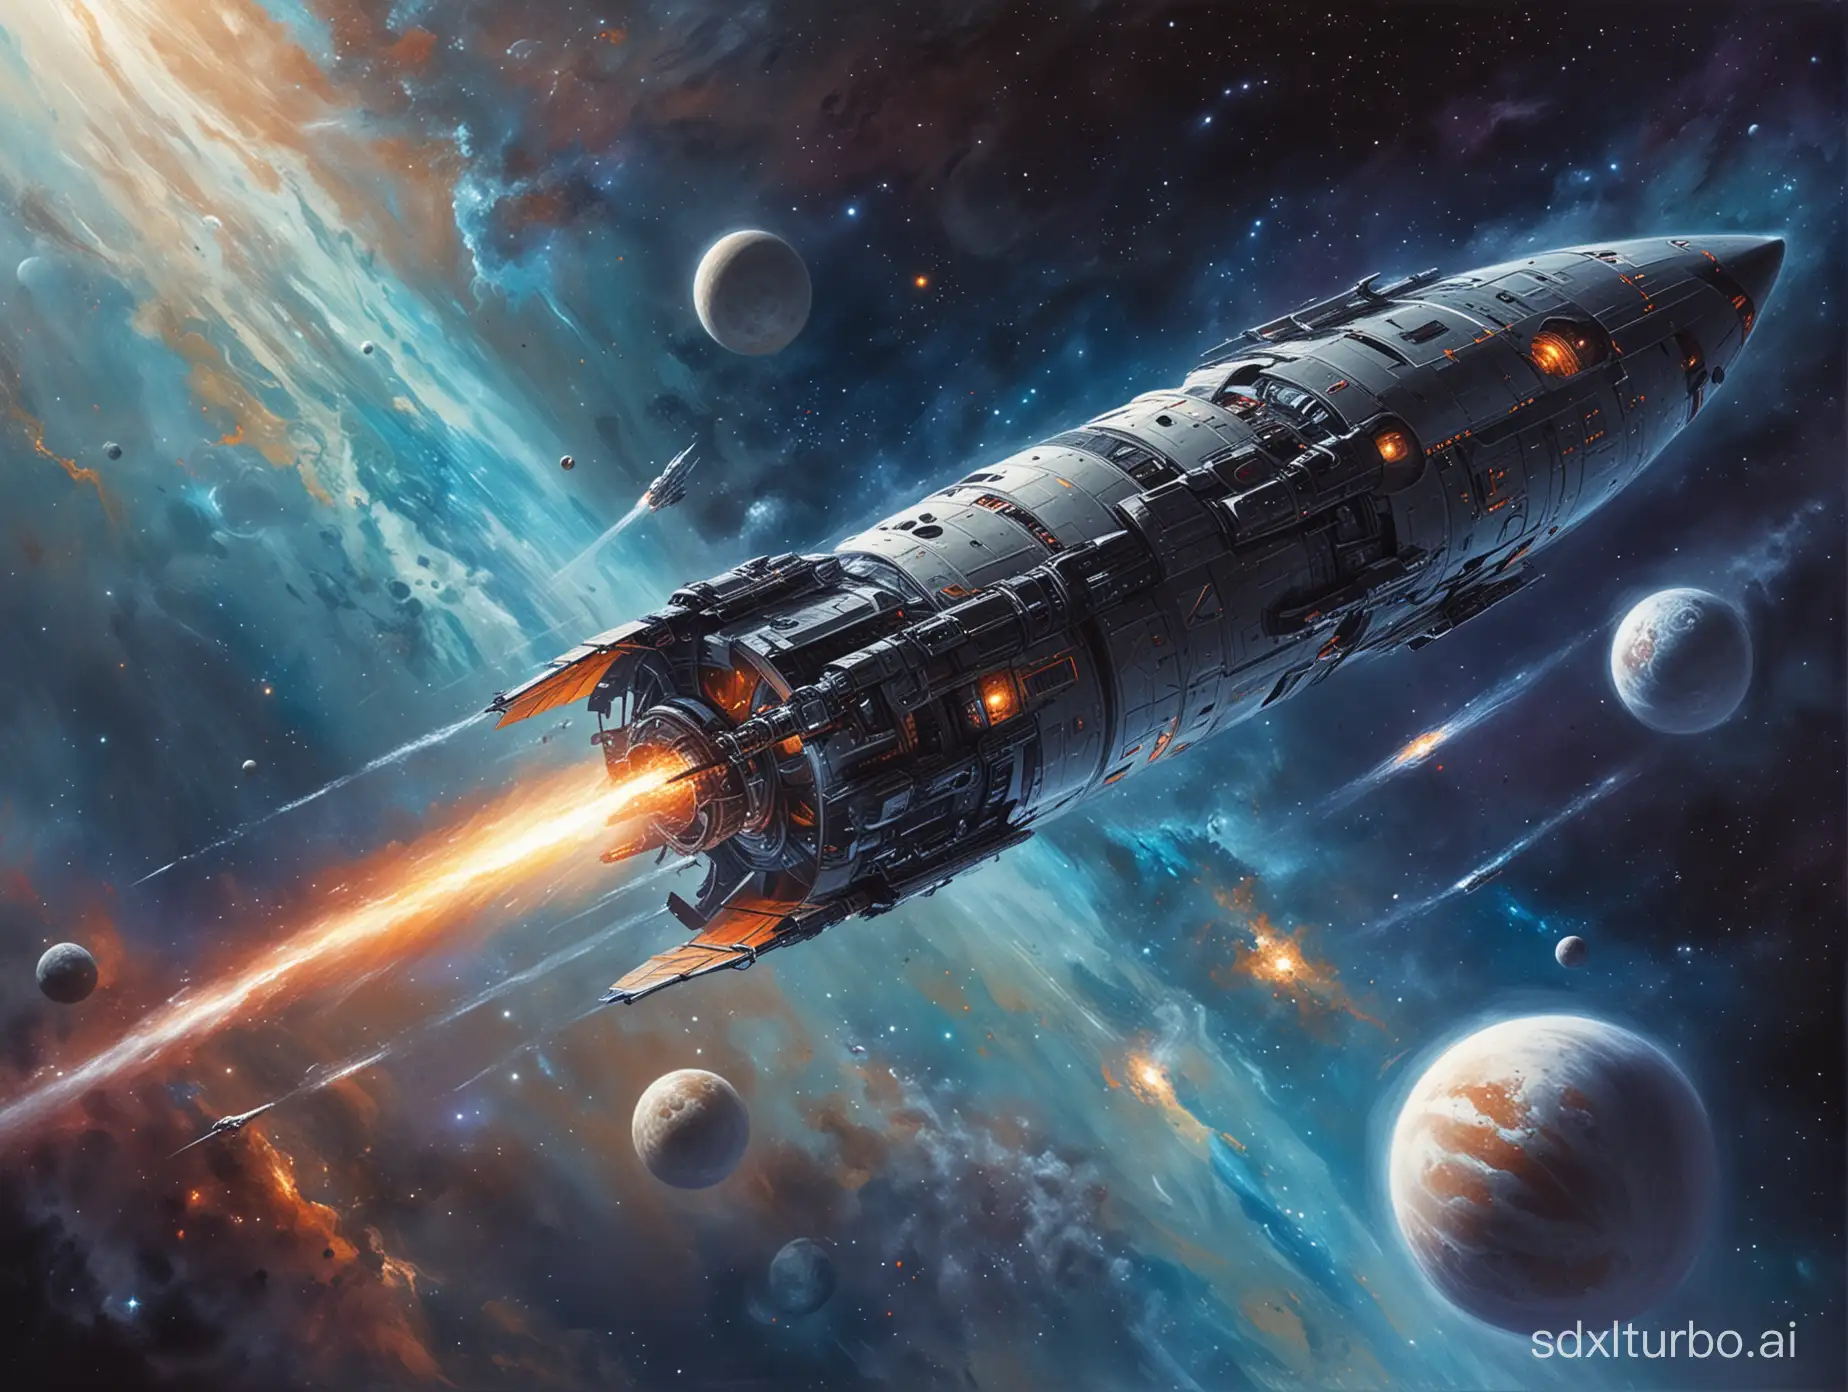 Space science fiction painting